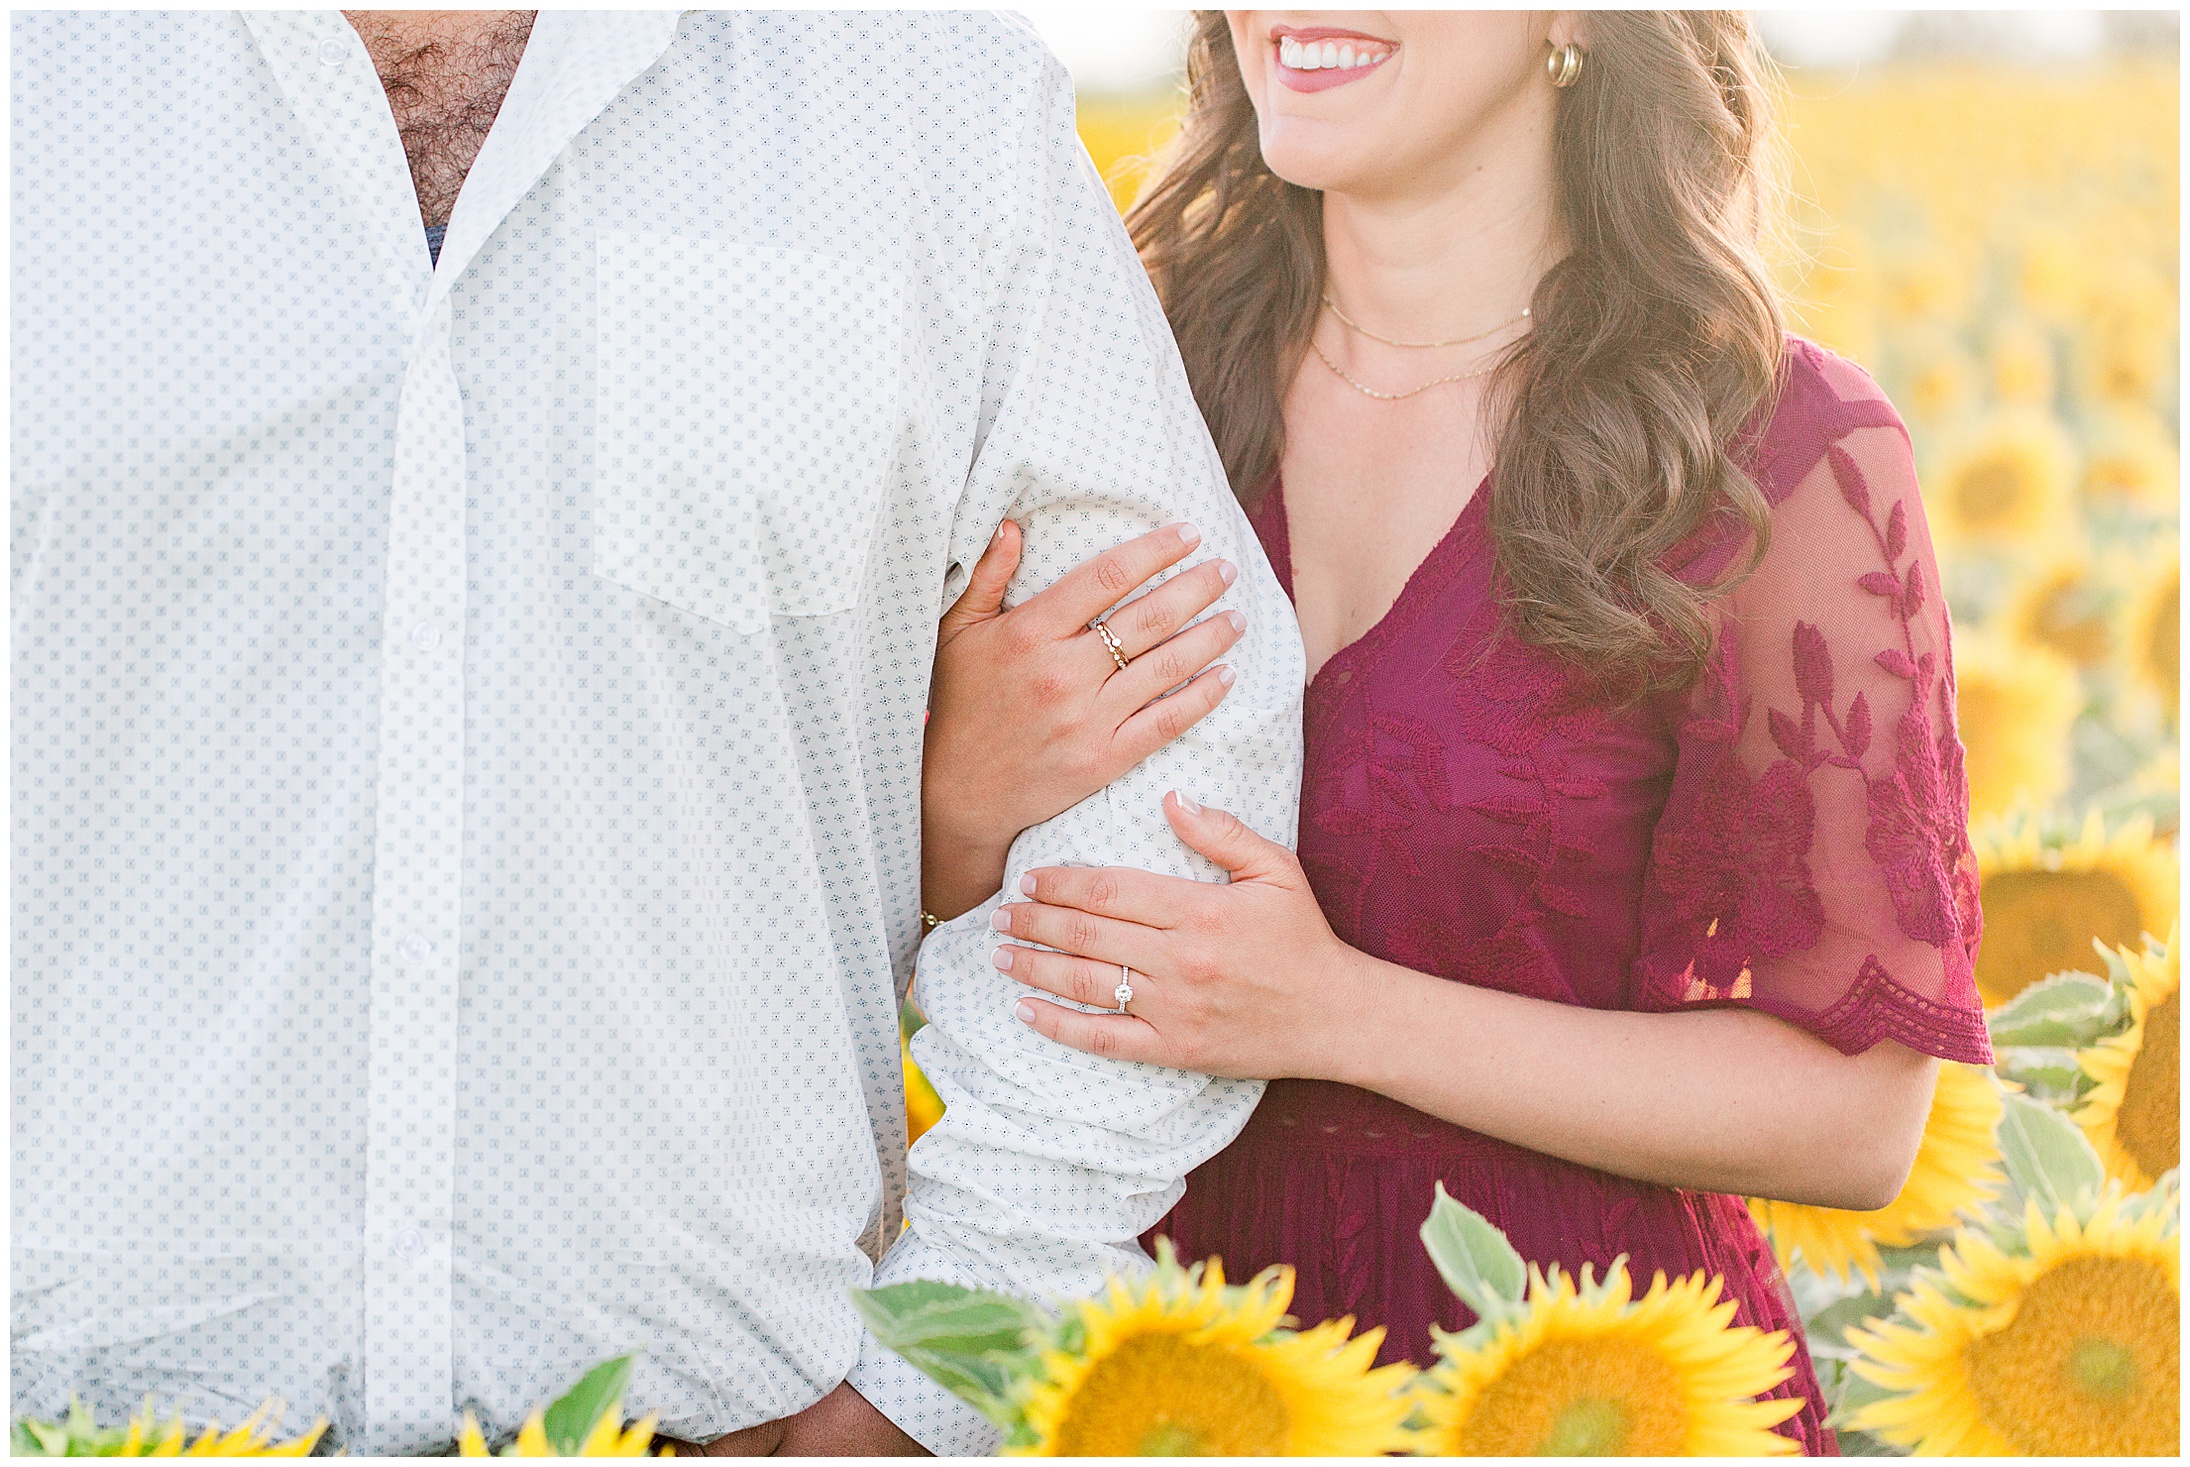 Willows Engagement Session Sunflowers Windmill Orchard Dog,